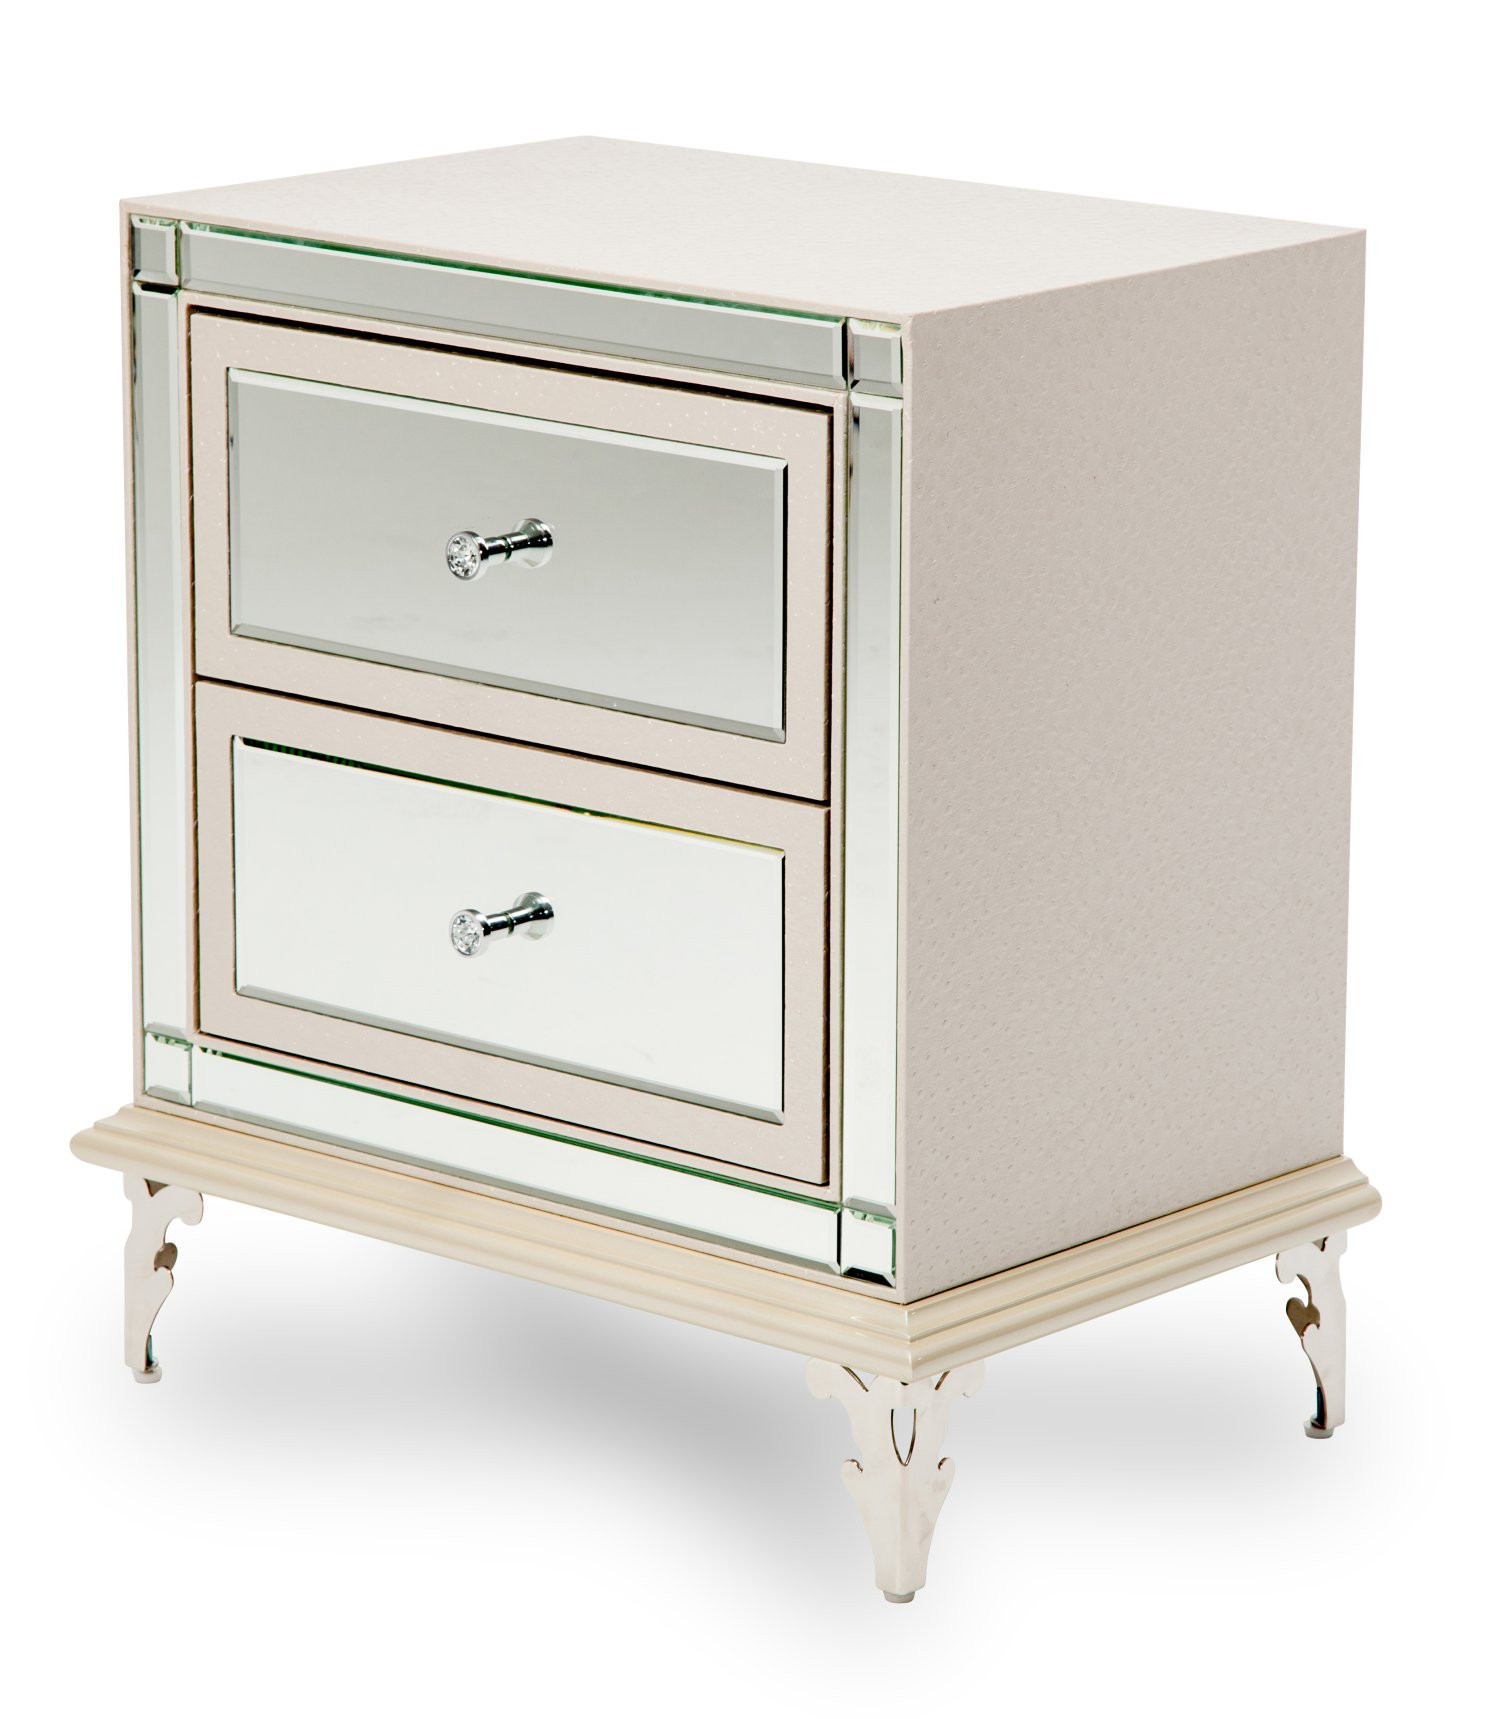 Upholstered Nightstand-Frost